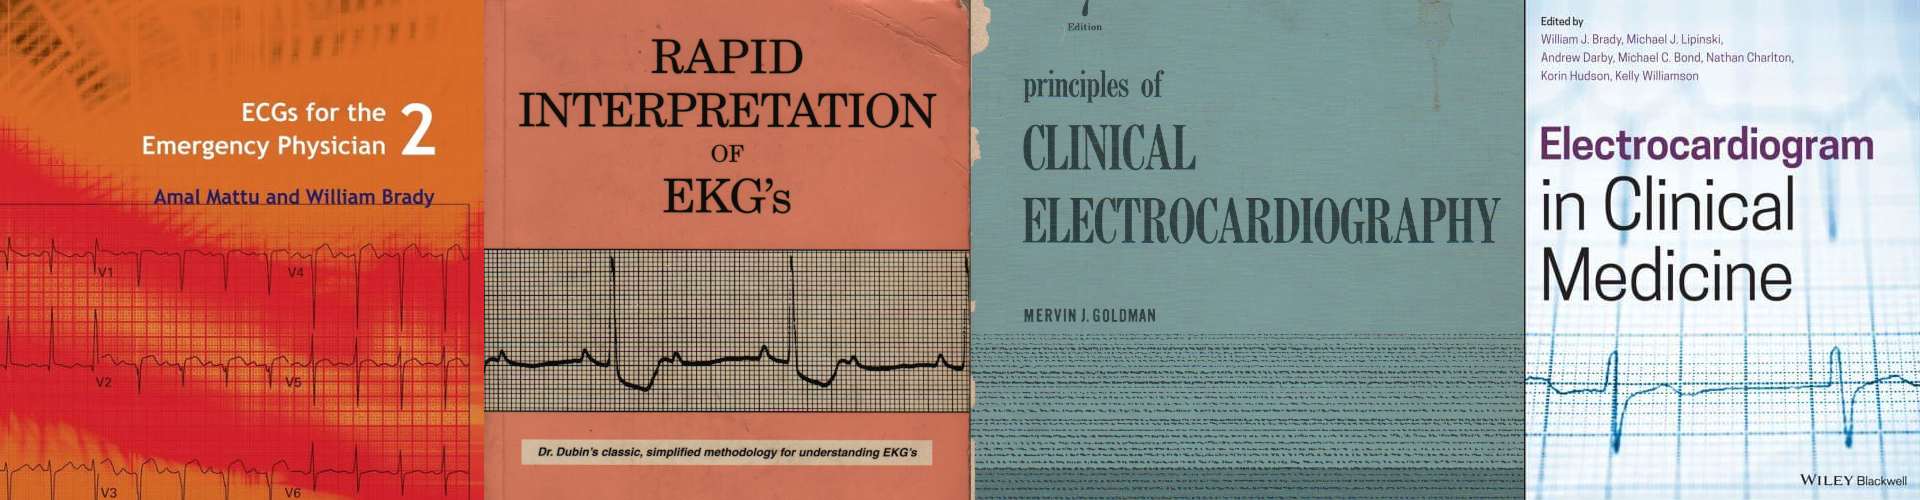 Rapid Interpretation of EKGs, Clinical Electrocardiography, and other well known ECG texts.